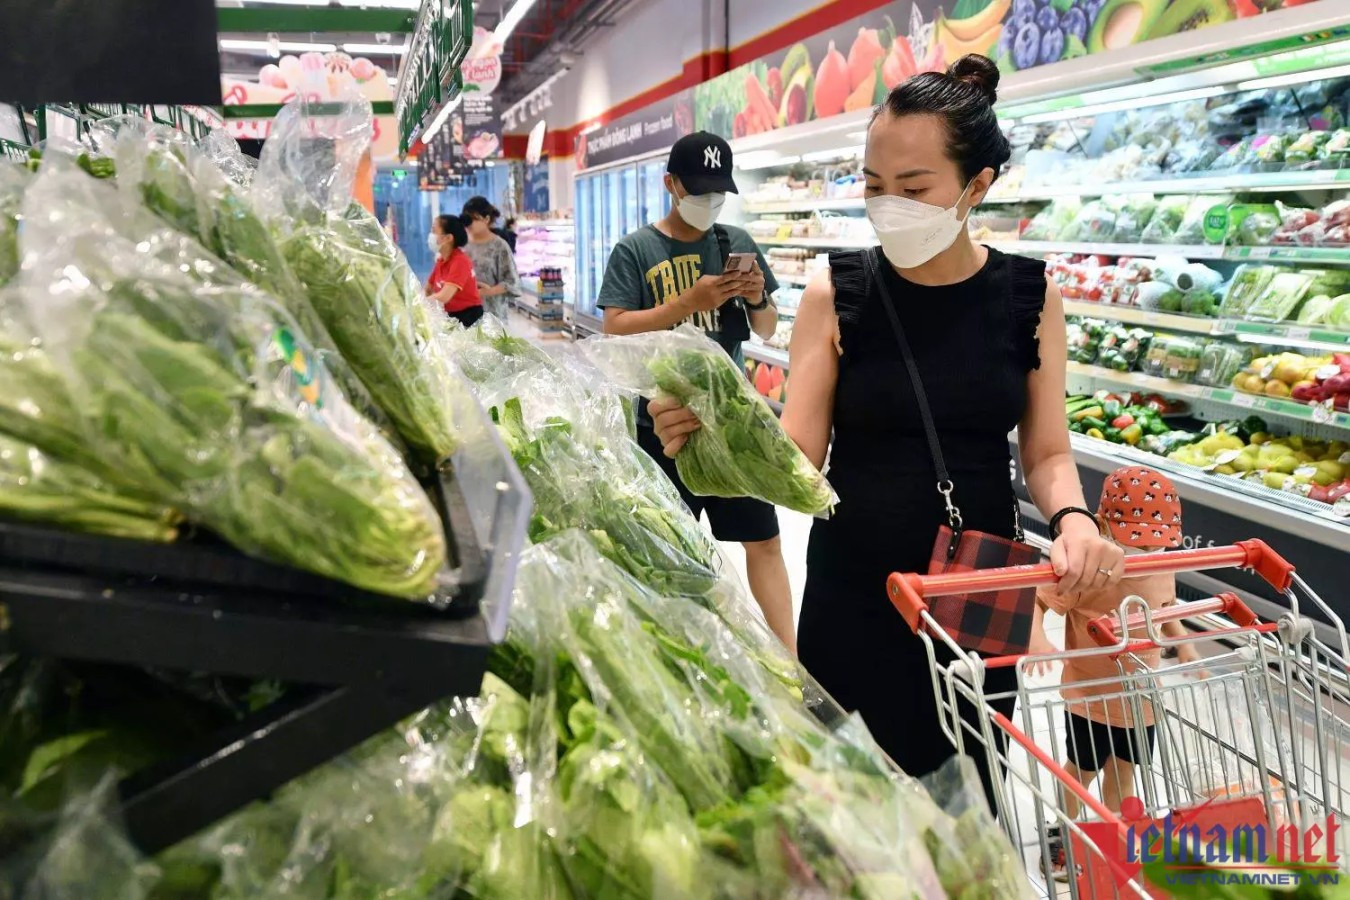 High inflation is biggest risk for Vietnam’s economy: officials